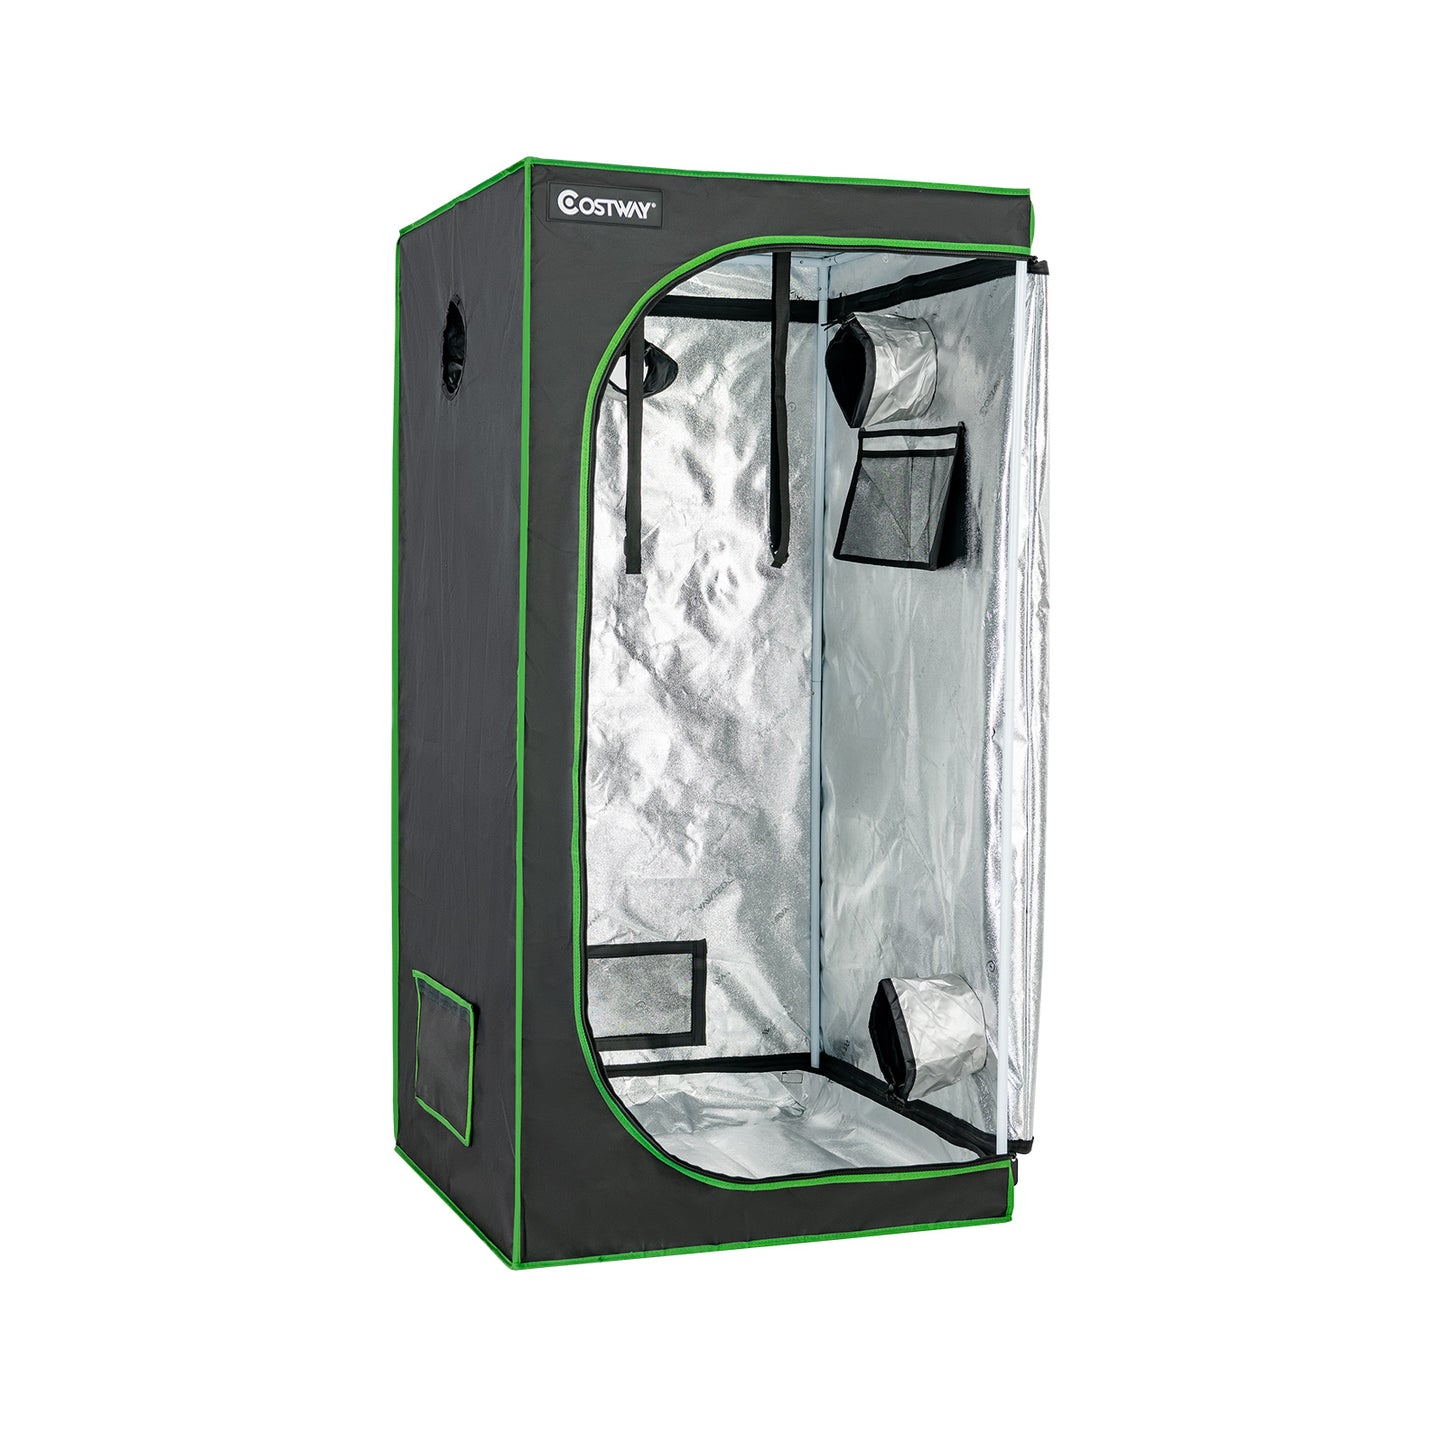 32 x 32 x 63 Inch Mylar Hydroponic Grow Tent with Observation Window and Floor Tray-Black